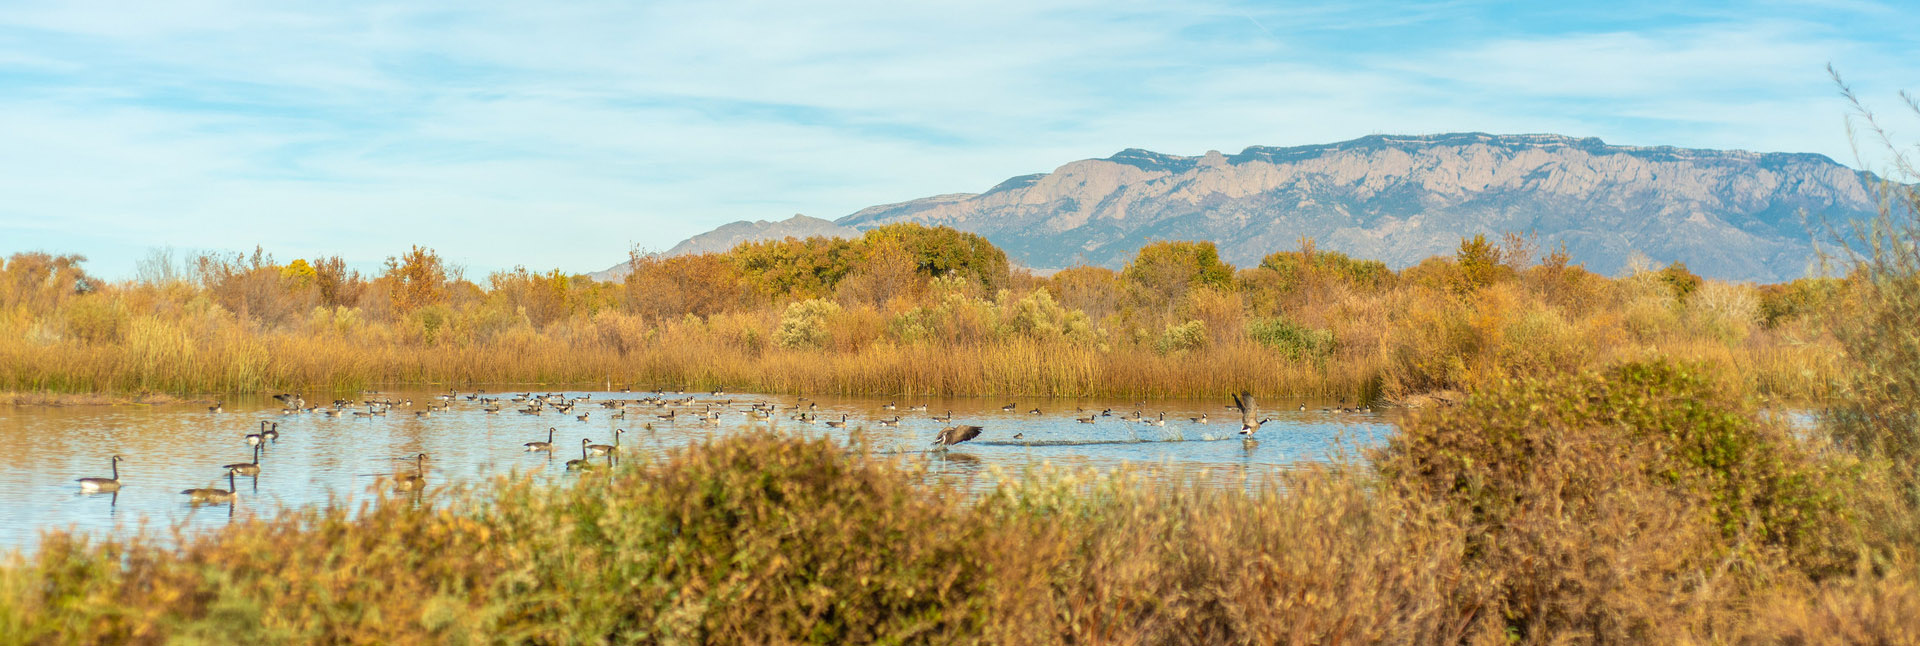 The Rio Grande bosque with the Sandia Mountains in the background